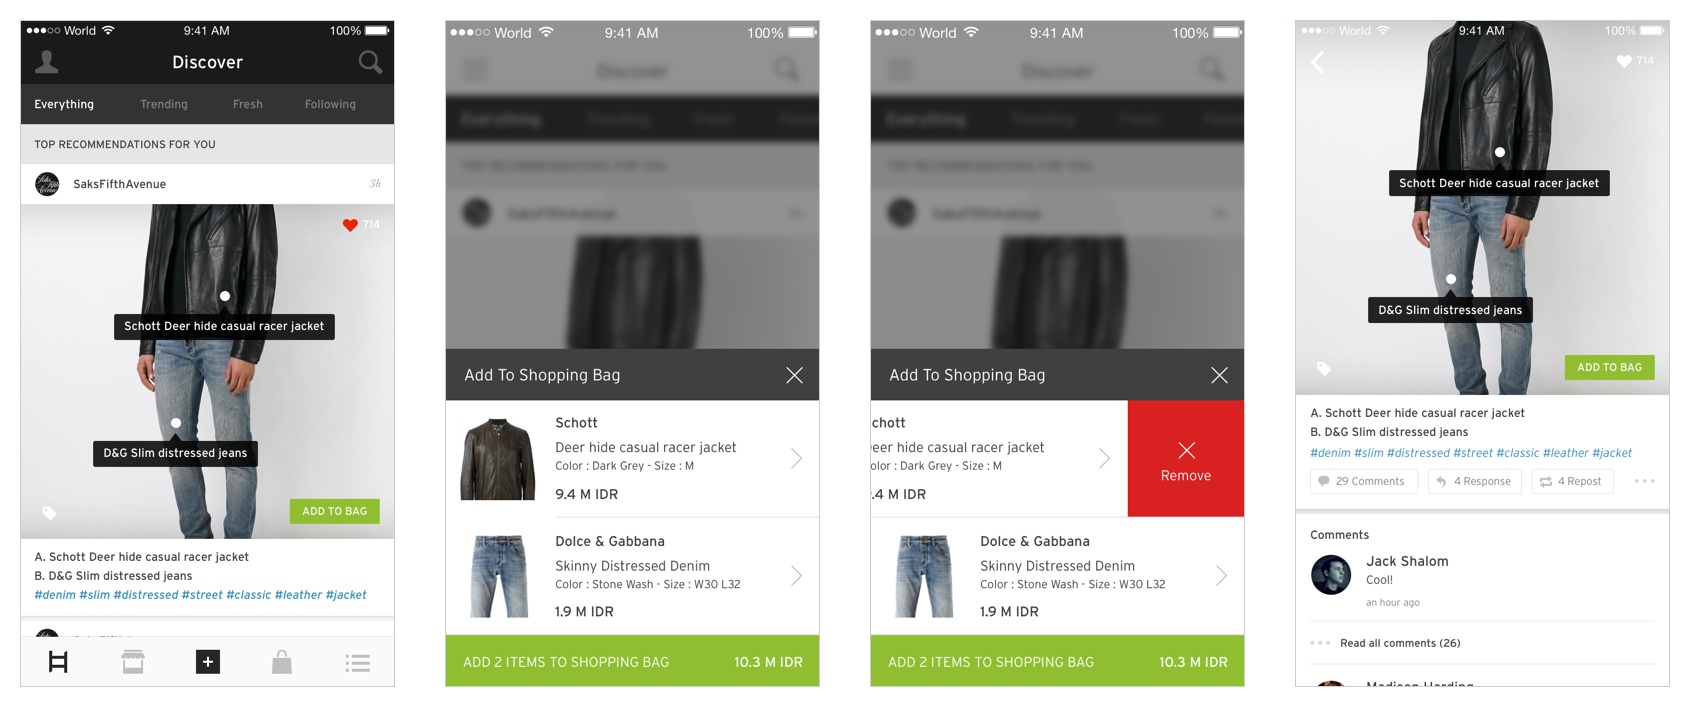 Hood Shopping User Experience and Interface Design